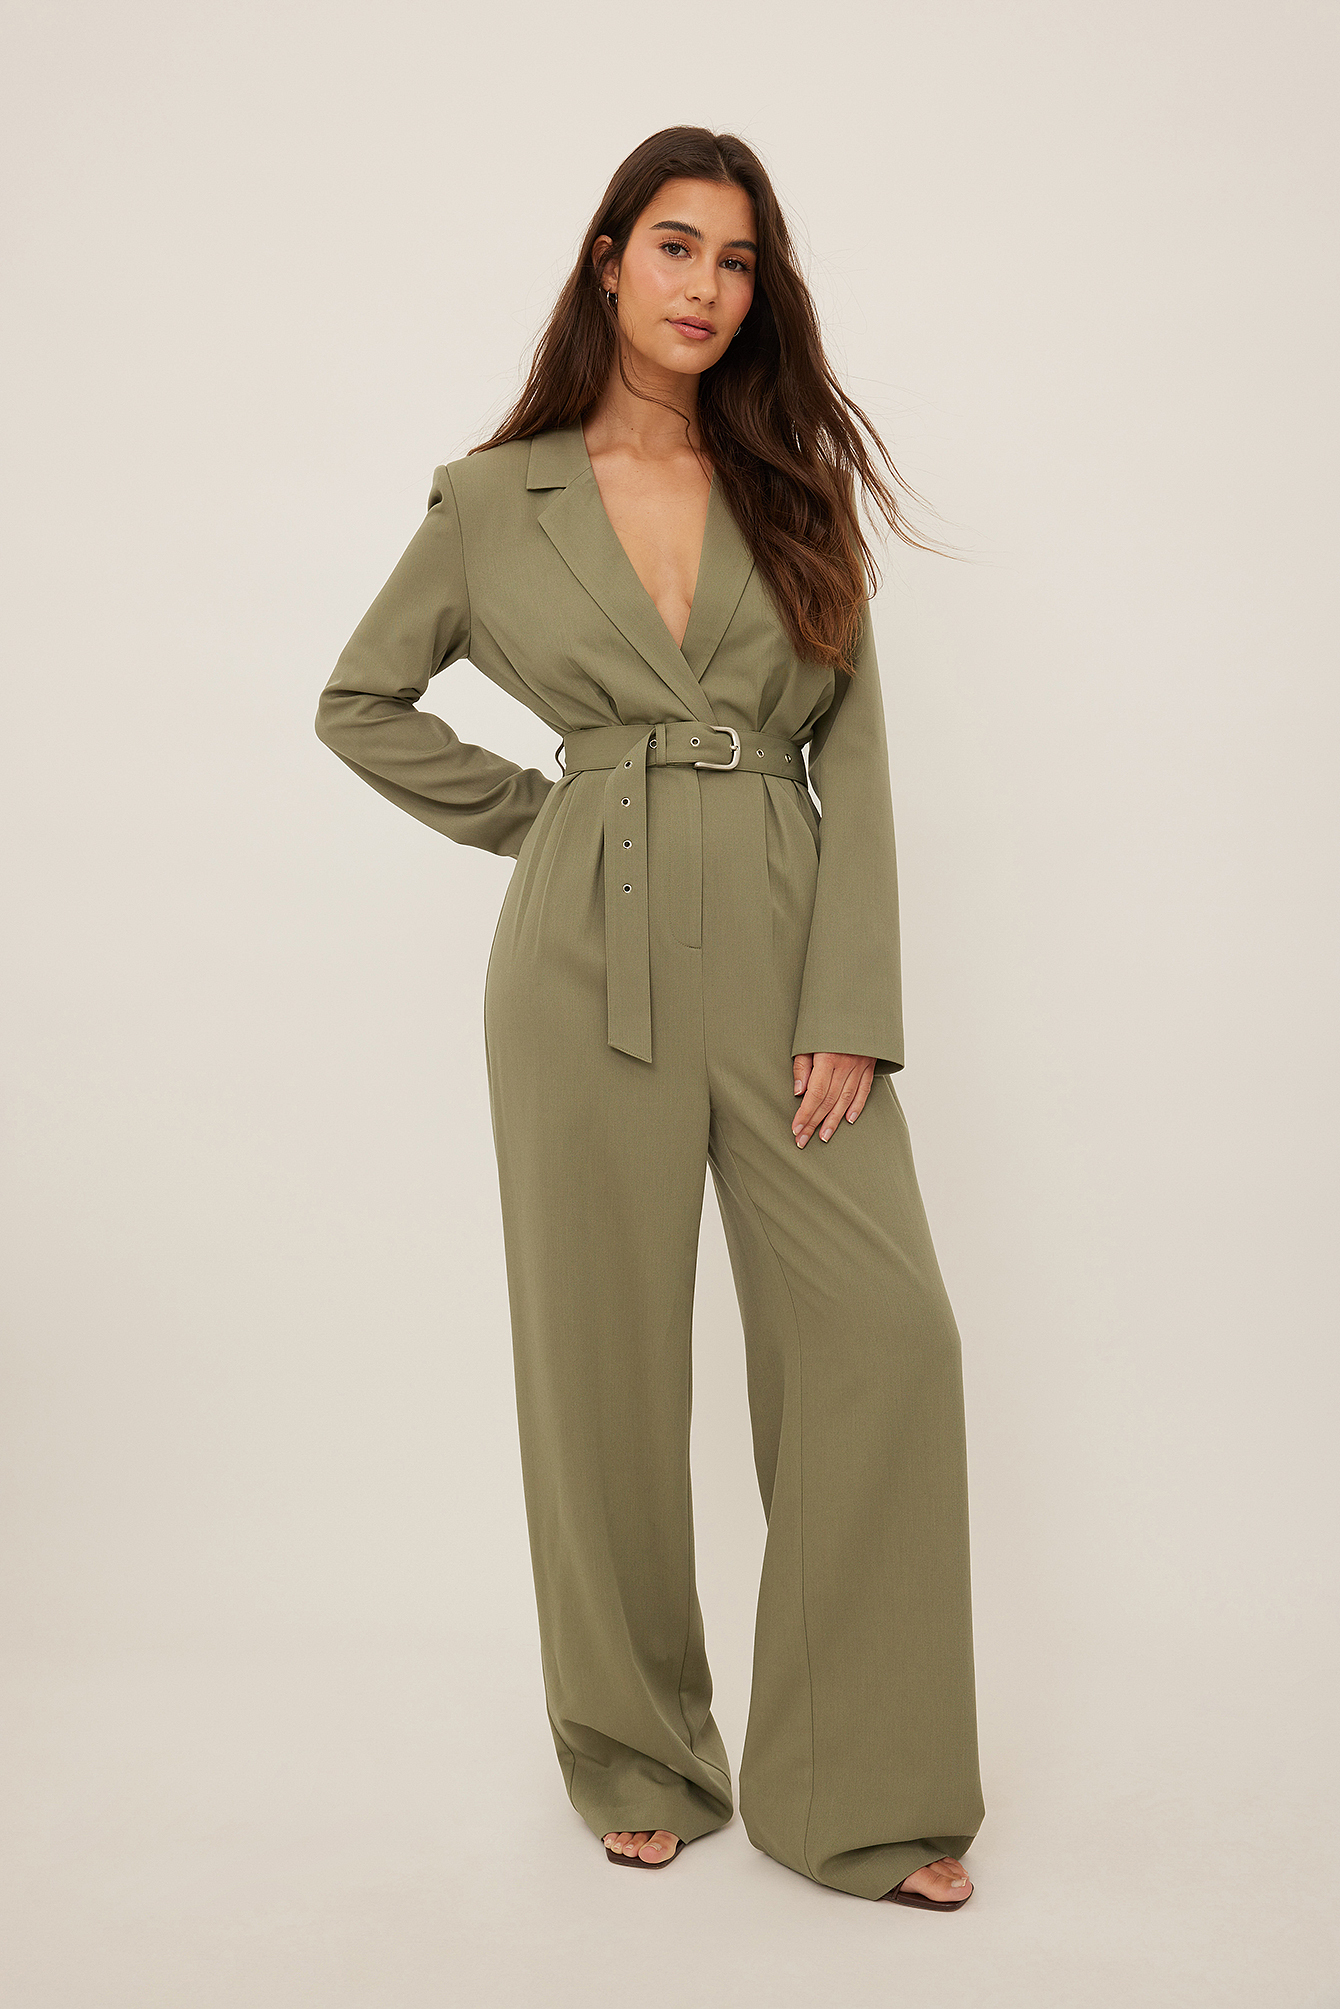 Box Pleated Jumpsuit Outfit.